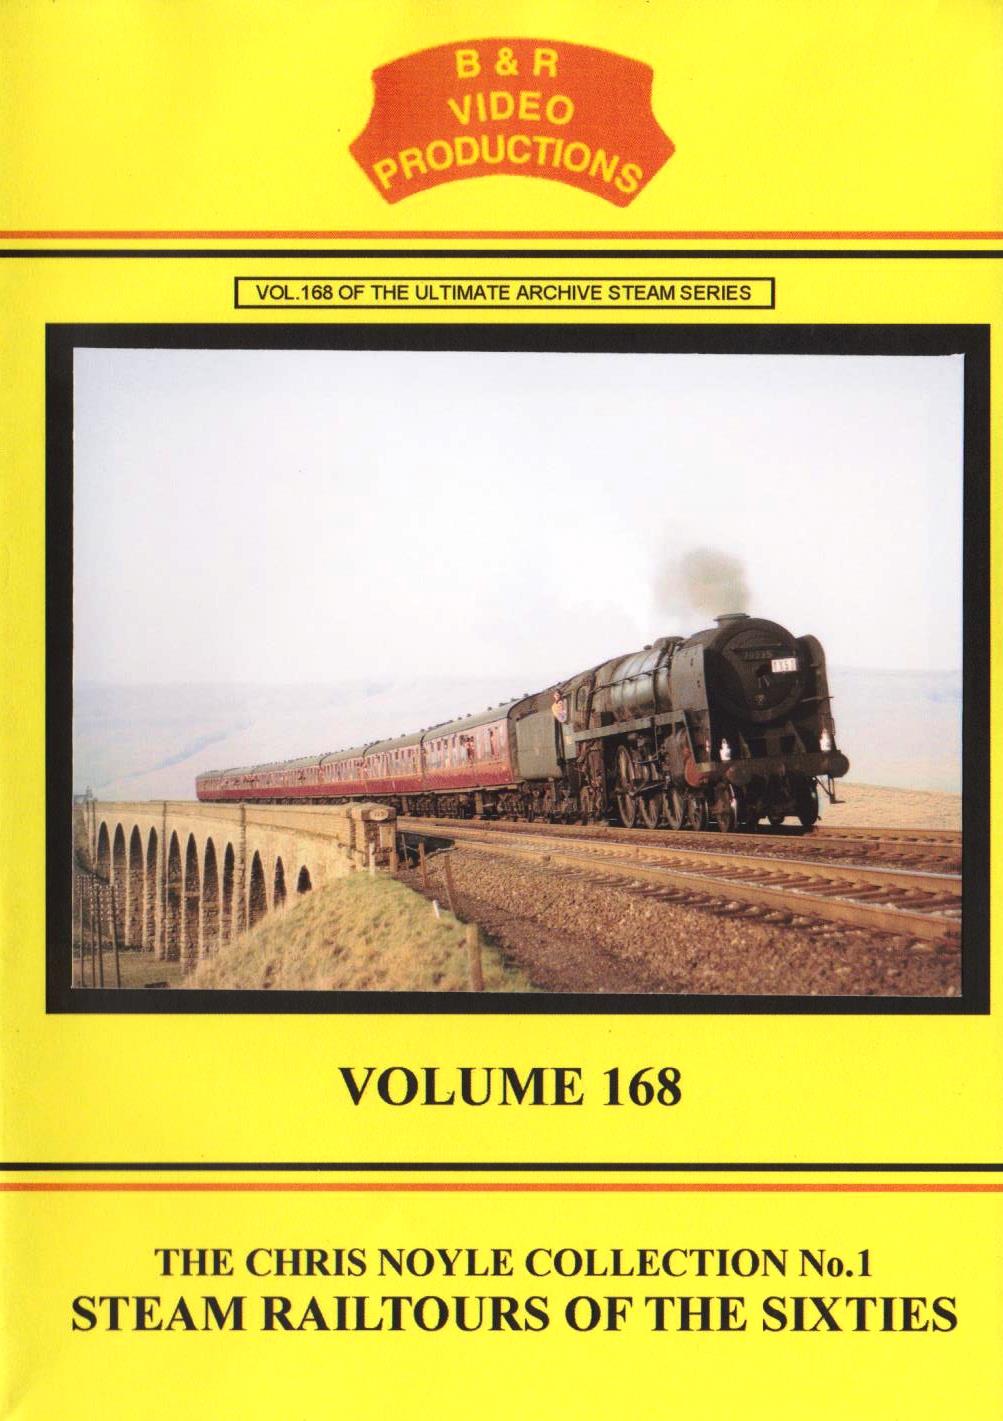 B & R Video Productions Vol 168 - The Chris Noyle collection No.1 Steam railtours of the sixties 